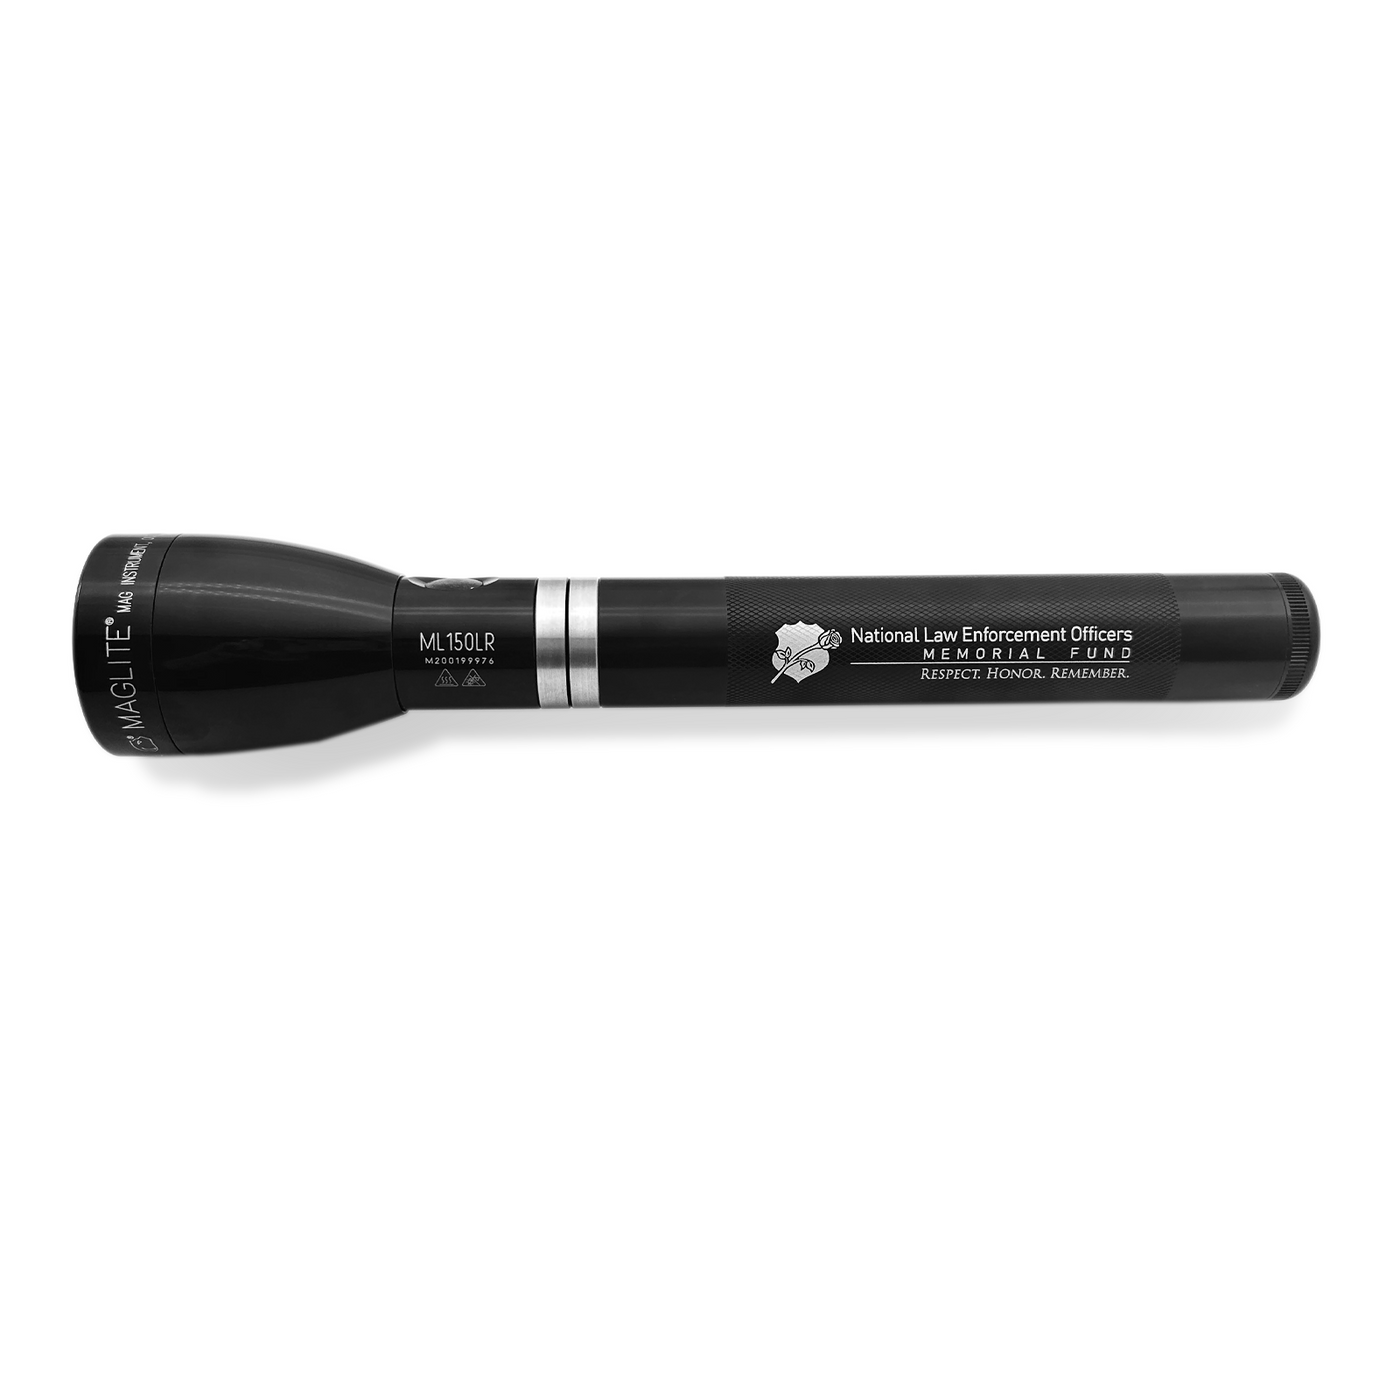 Maglite ML150LRX LED Rechargeable flashlight with NLEOMF Engraving